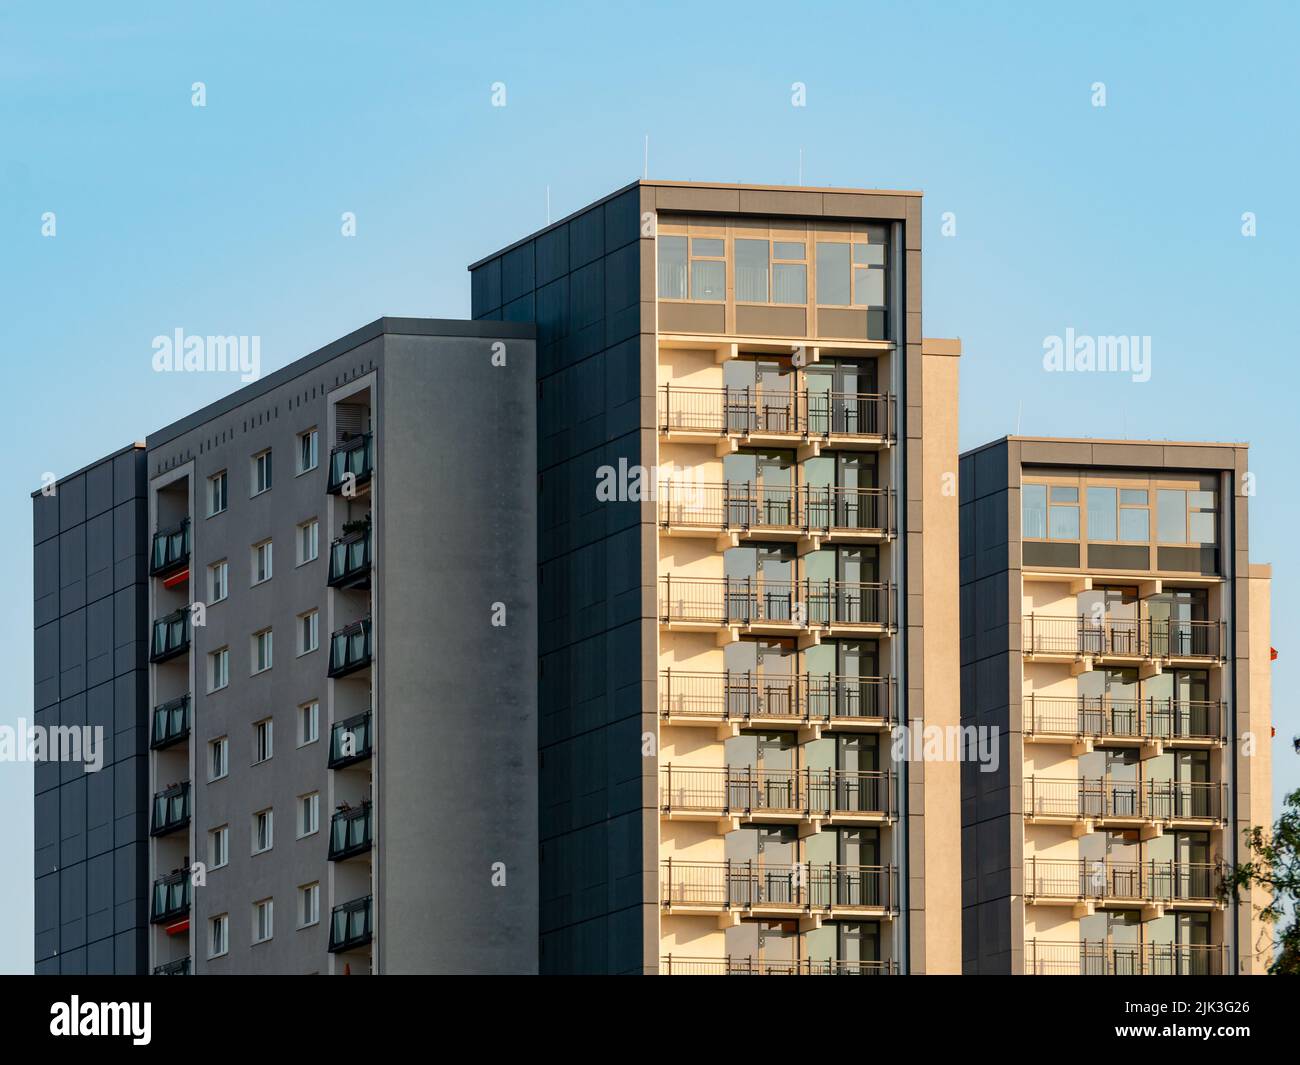 Top of the WHH 17 apartment buildings in the city. Two of the towers next to each other. Residential architecture in the former East Germany. Stock Photo